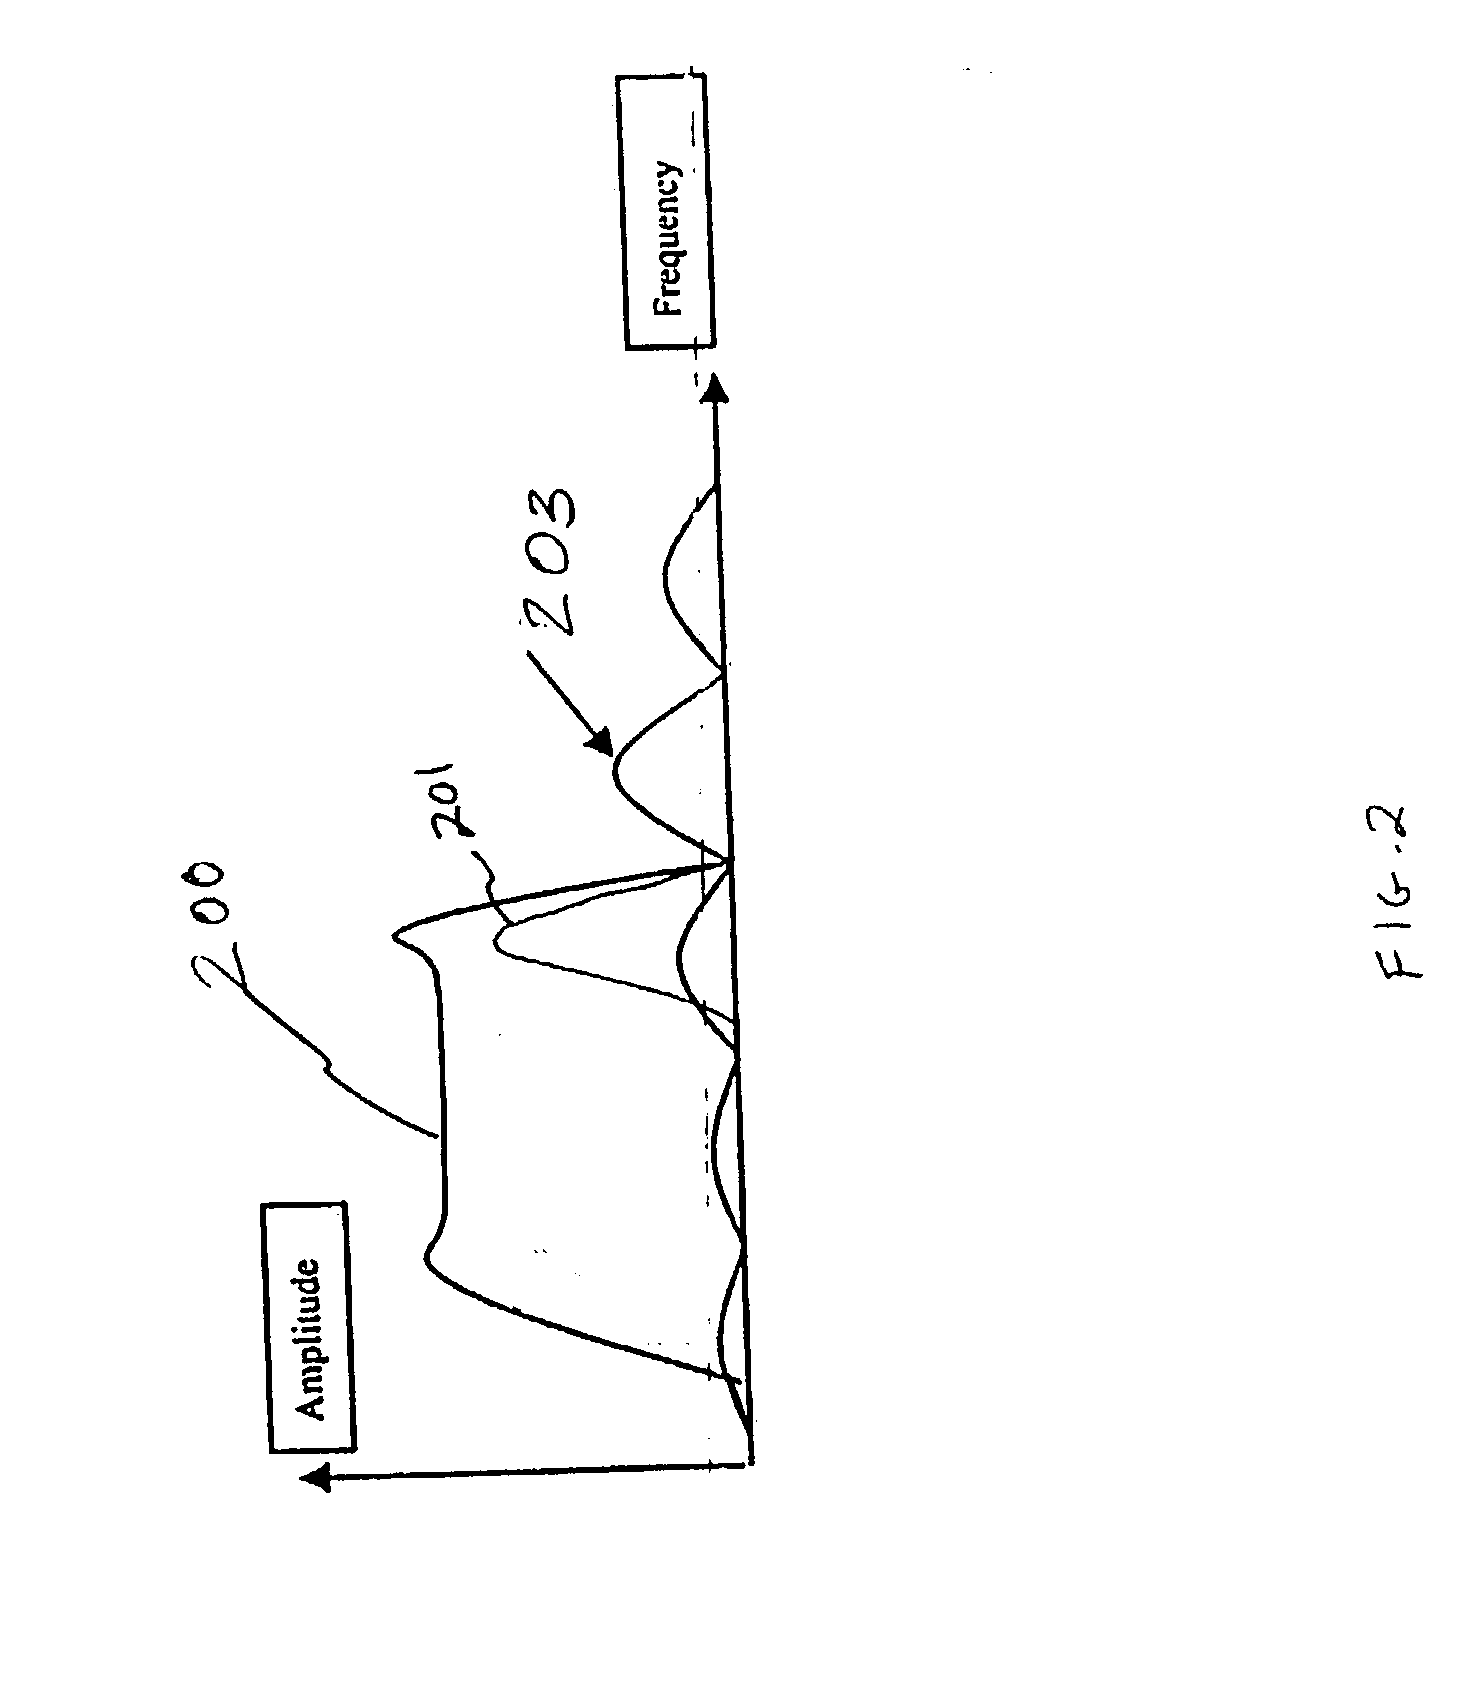 Method and system of reducing electromagnetic interference emissions